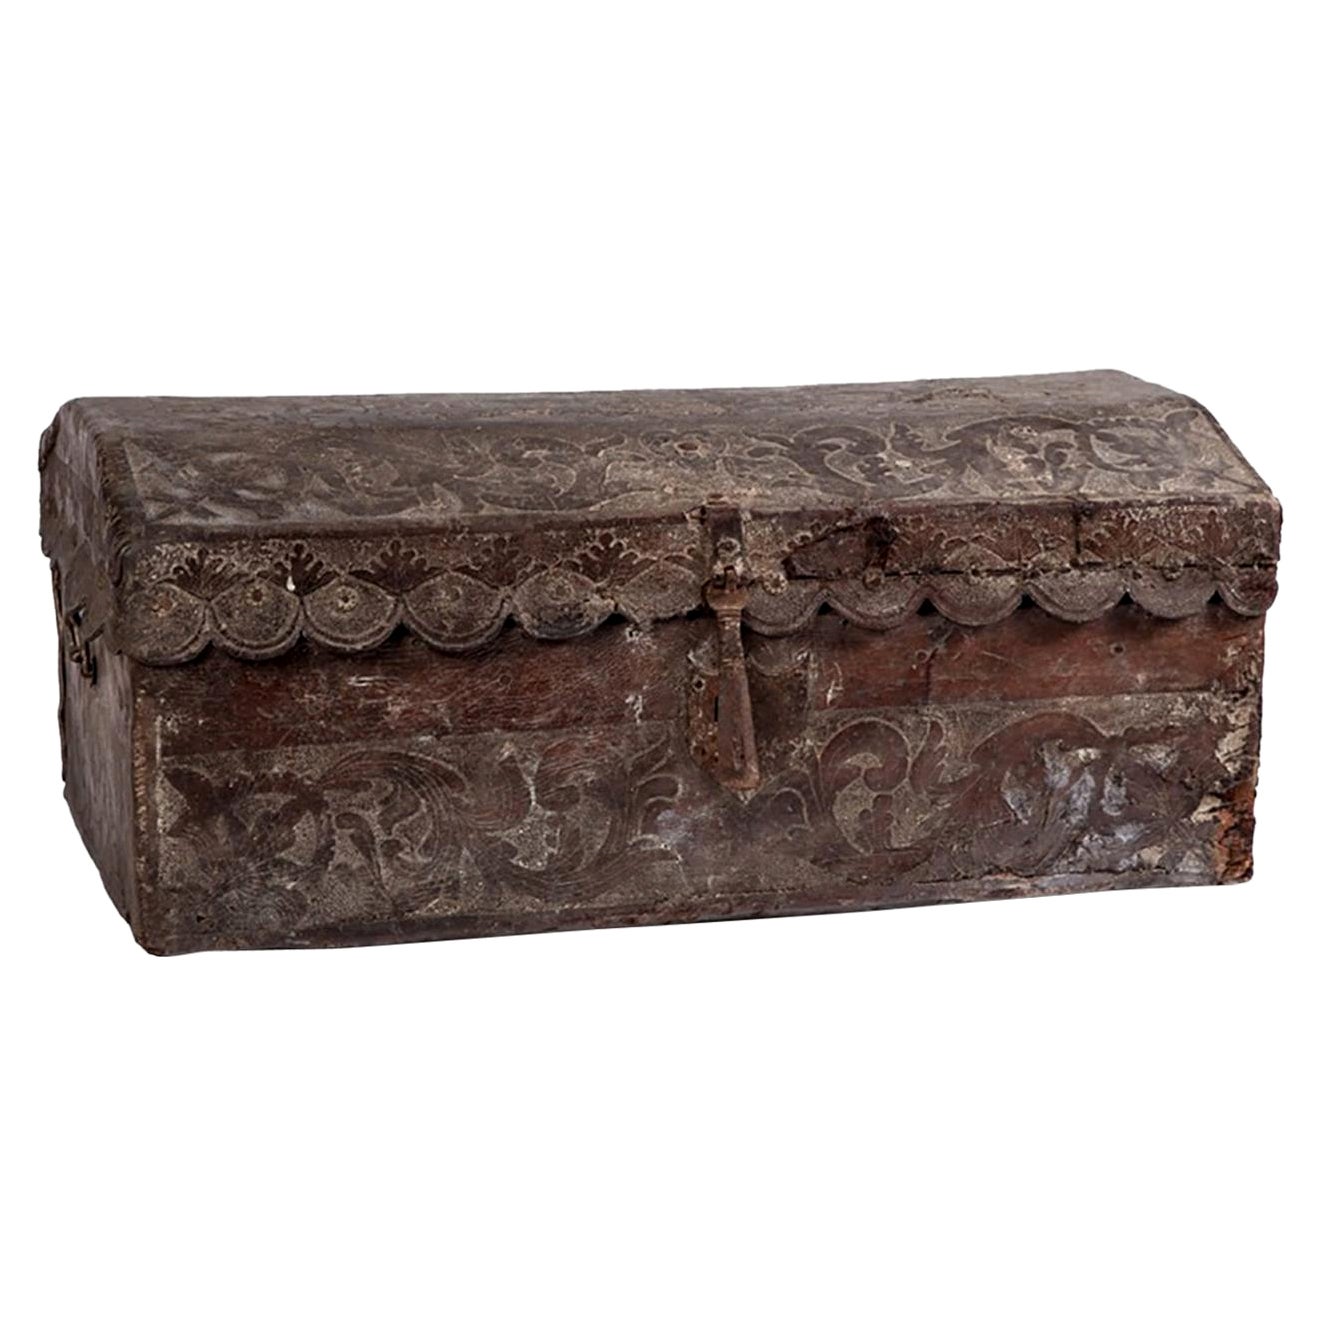 18th Century Peruvian Engraved Leather Decorated Dome Top Trunk Dated 1767 For Sale